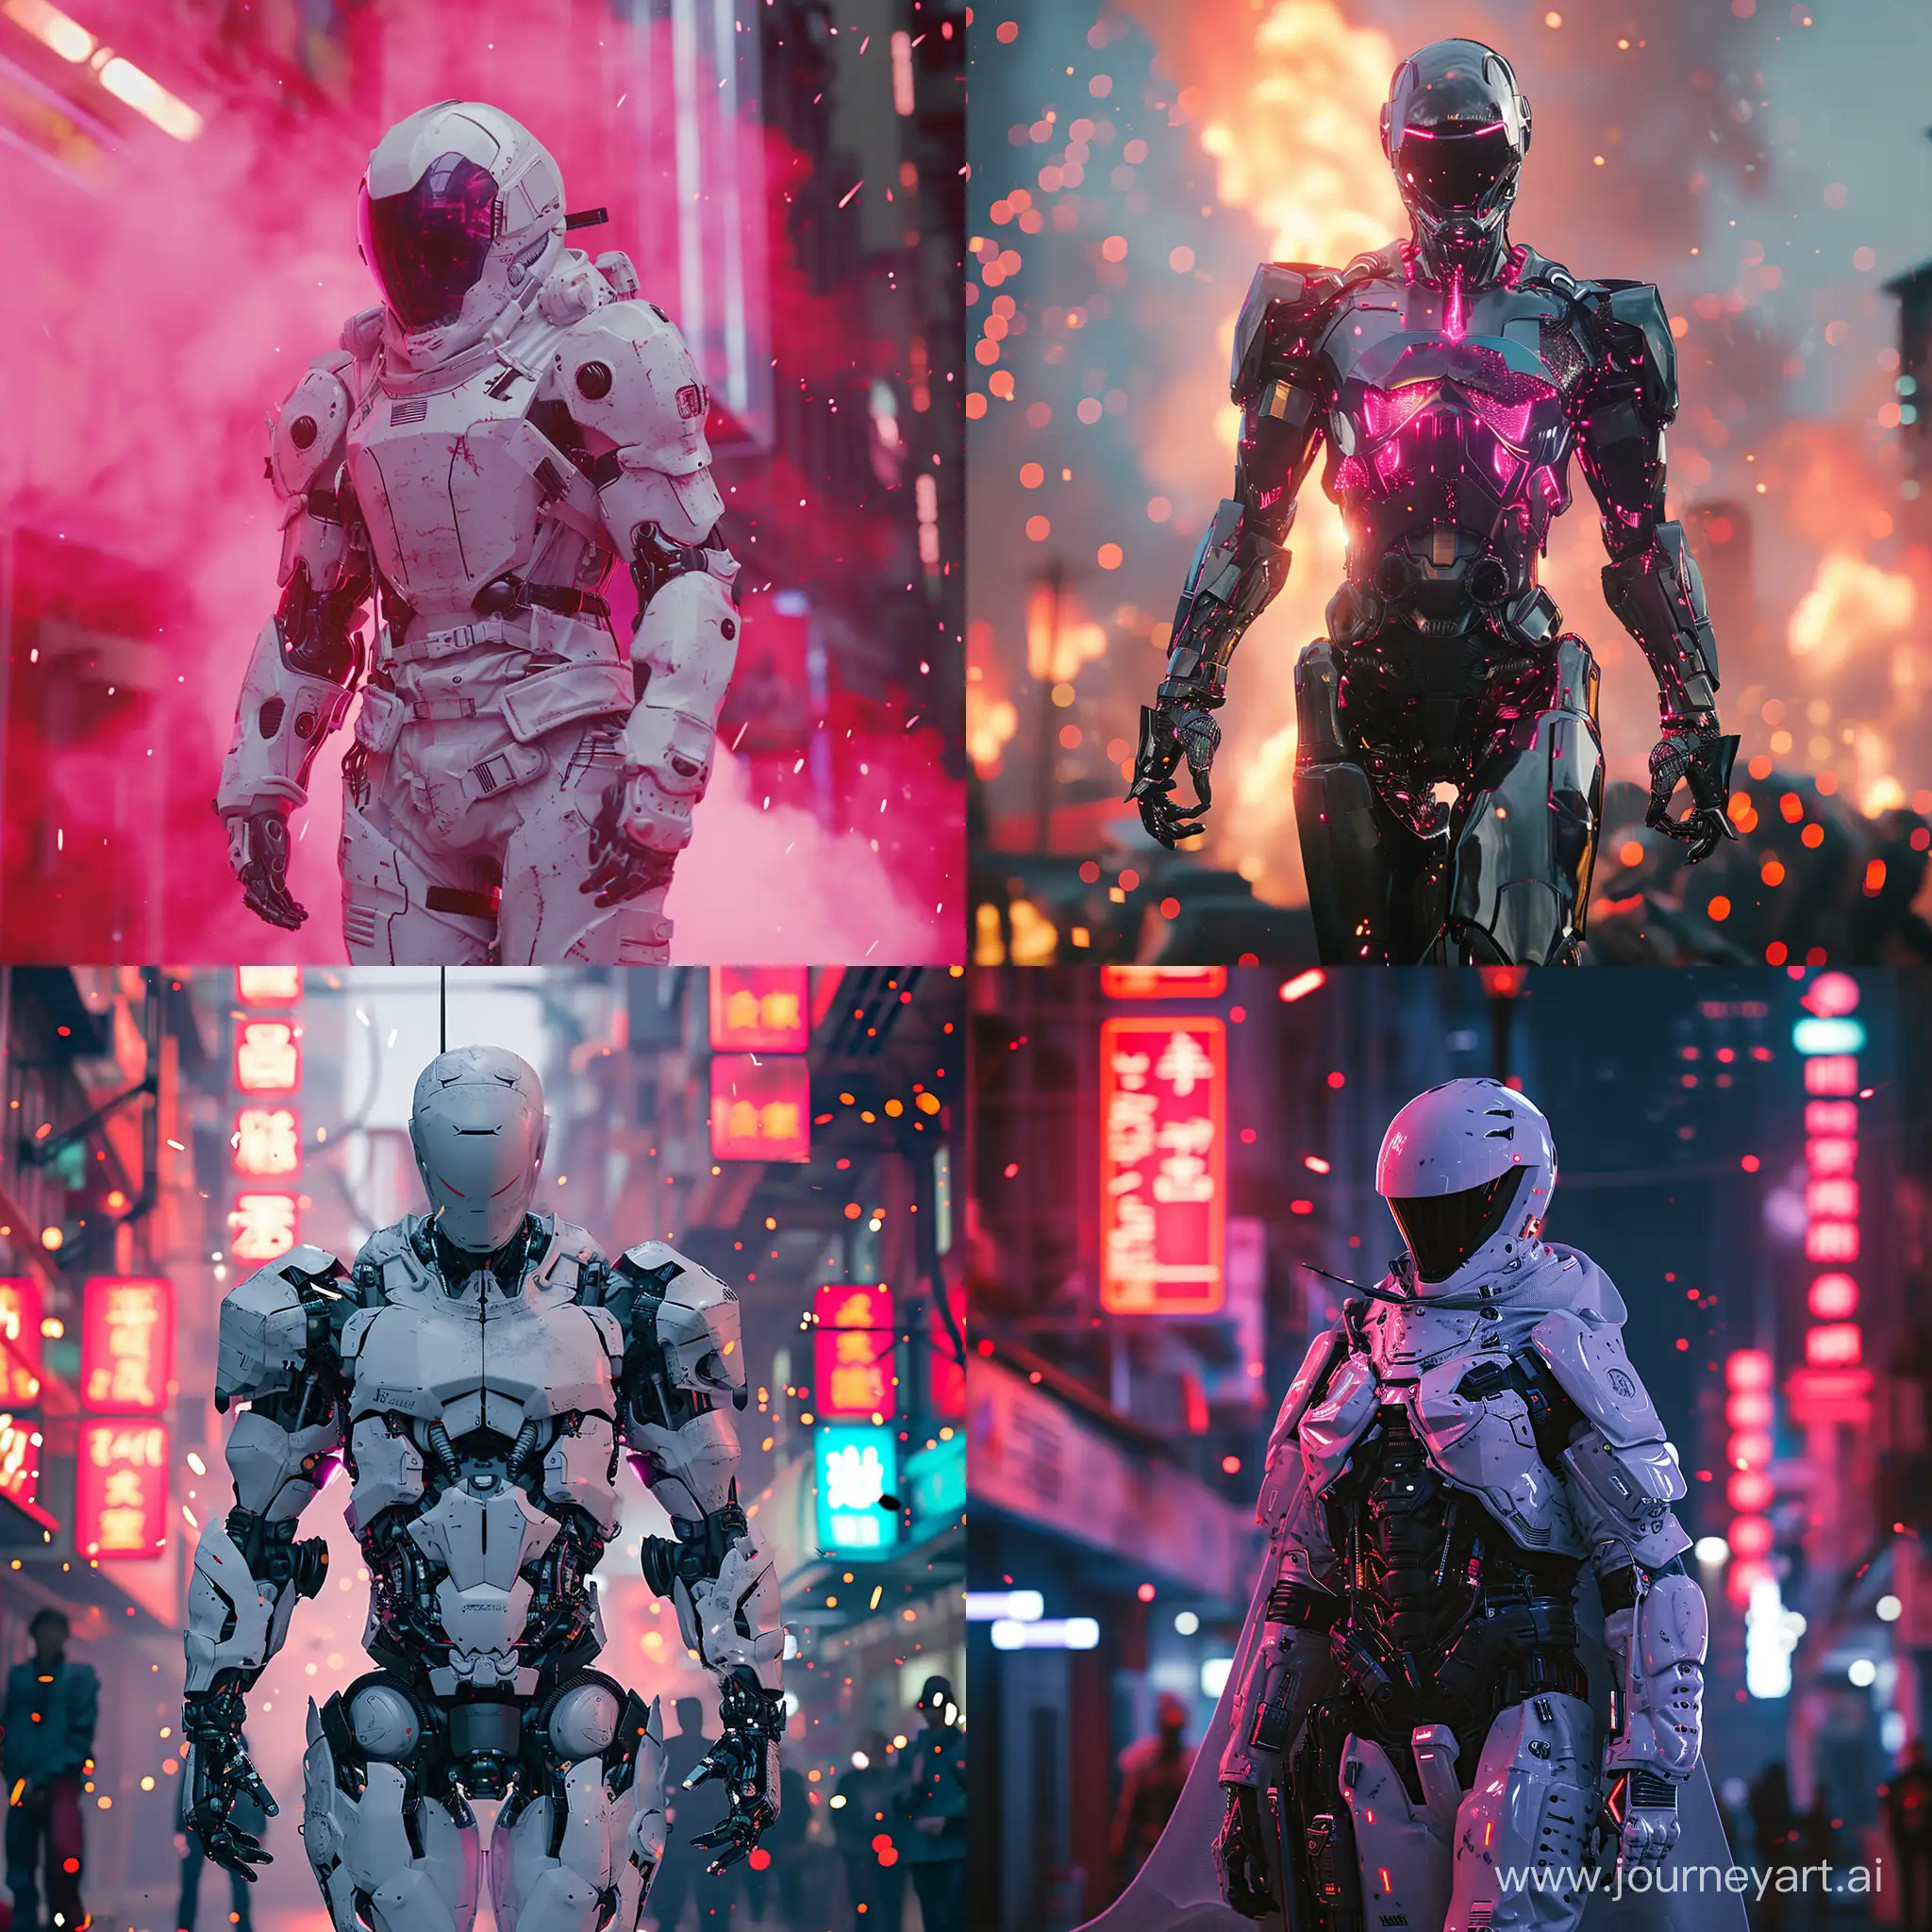 Epic-Cybernetic-White-Knight-in-Vibrant-Cyberpunk-Explosion